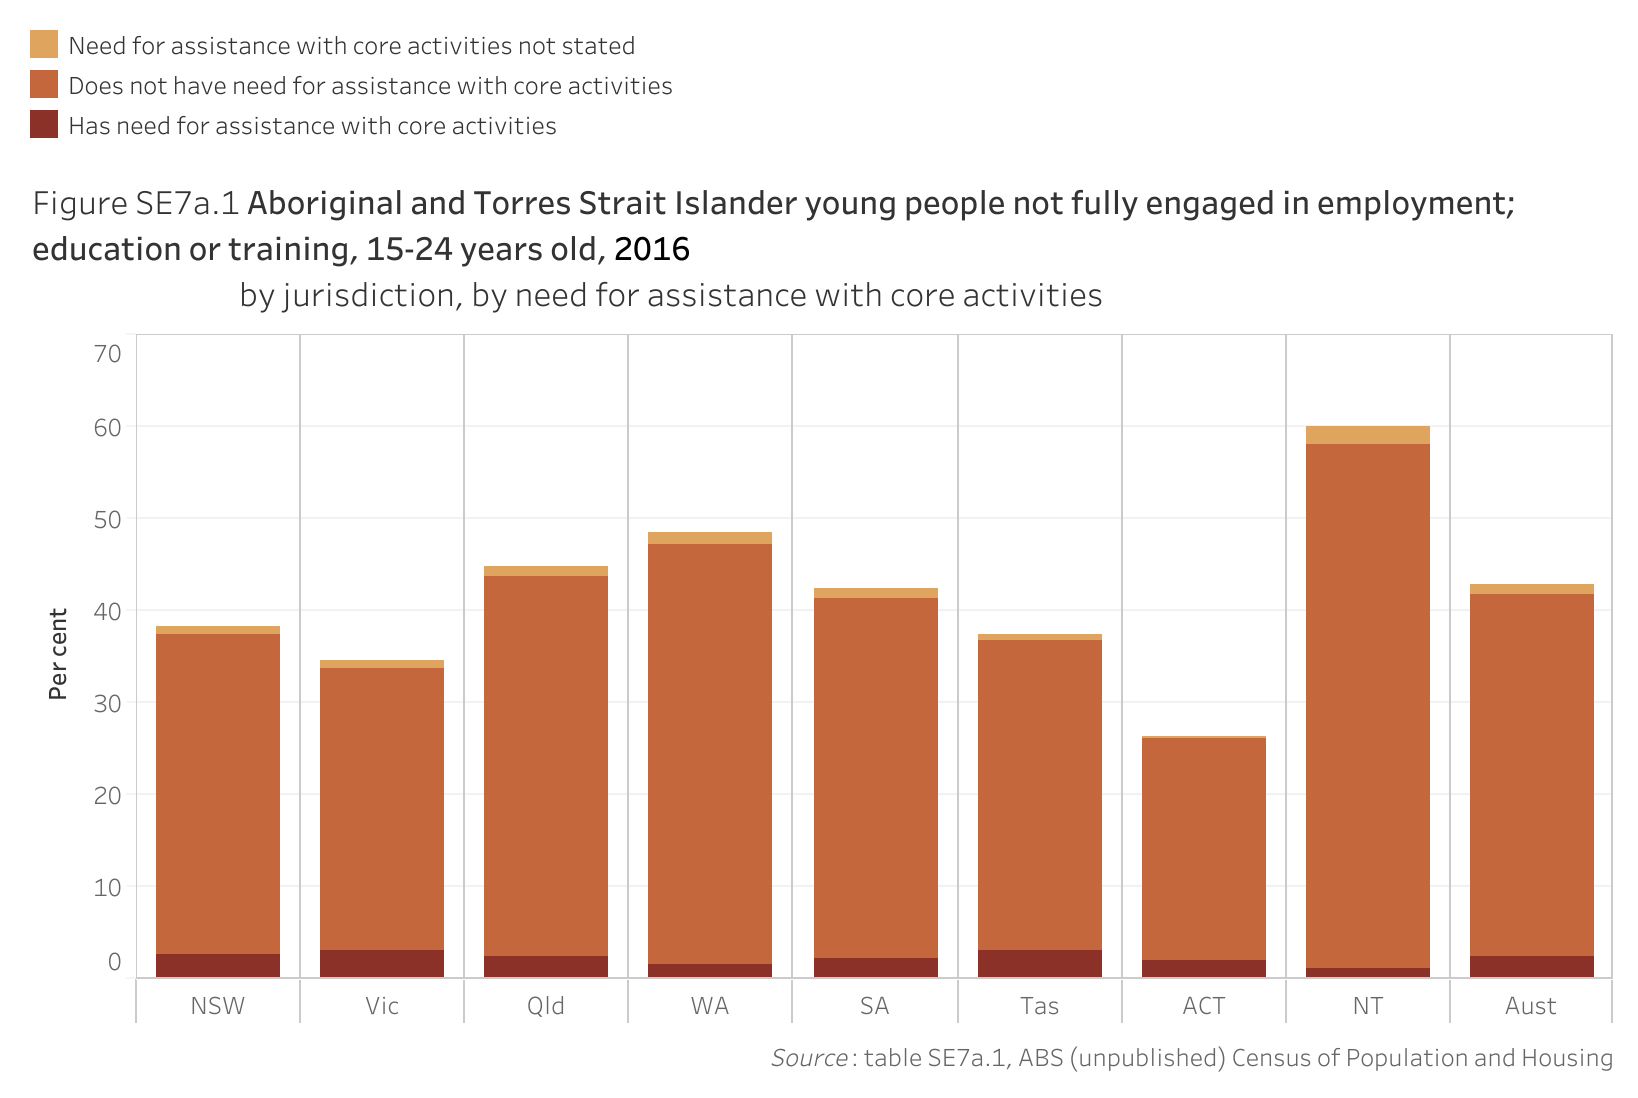 Figure SE7a.1. Bar chart showing the proportion of Aboriginal and Torres Strait Islander young people aged 15-24 years old not fully engaged in employment; education or training in 2016, by jurisdiction and by need for assistance with core activities. Data table of figure SE7a.1 is below.